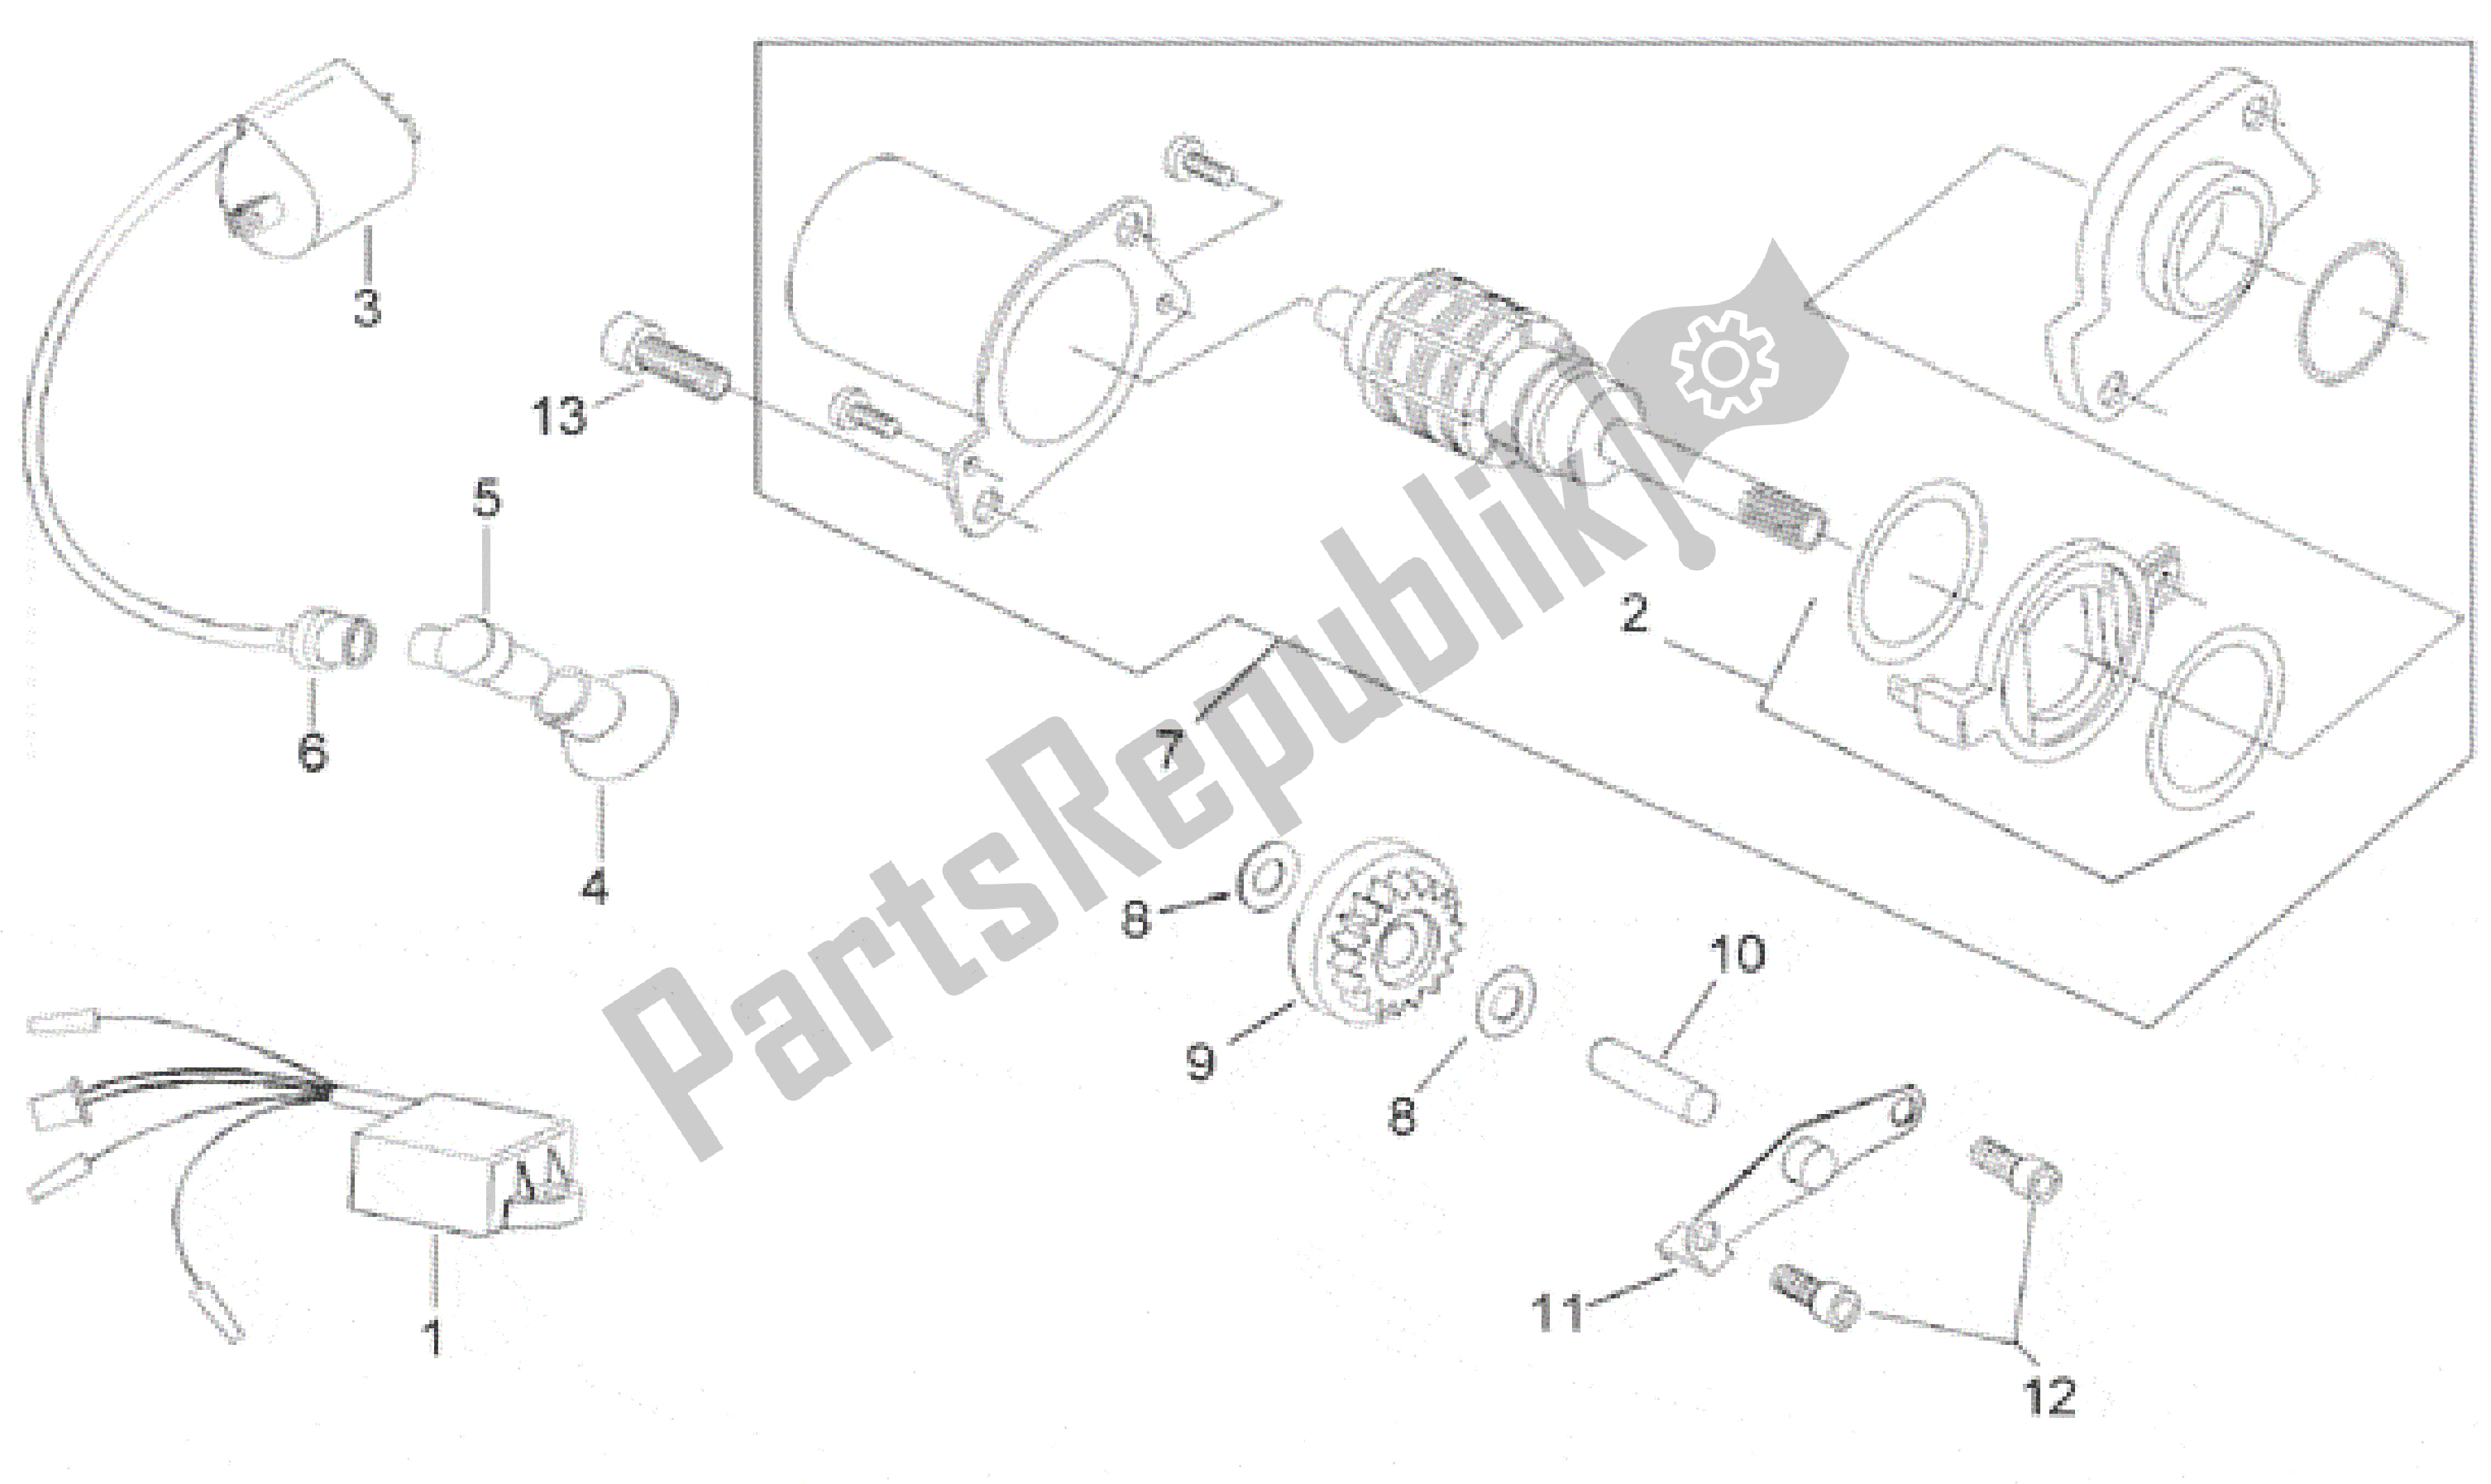 All parts for the Ignition Unit of the Aprilia Scarabeo 50 1999